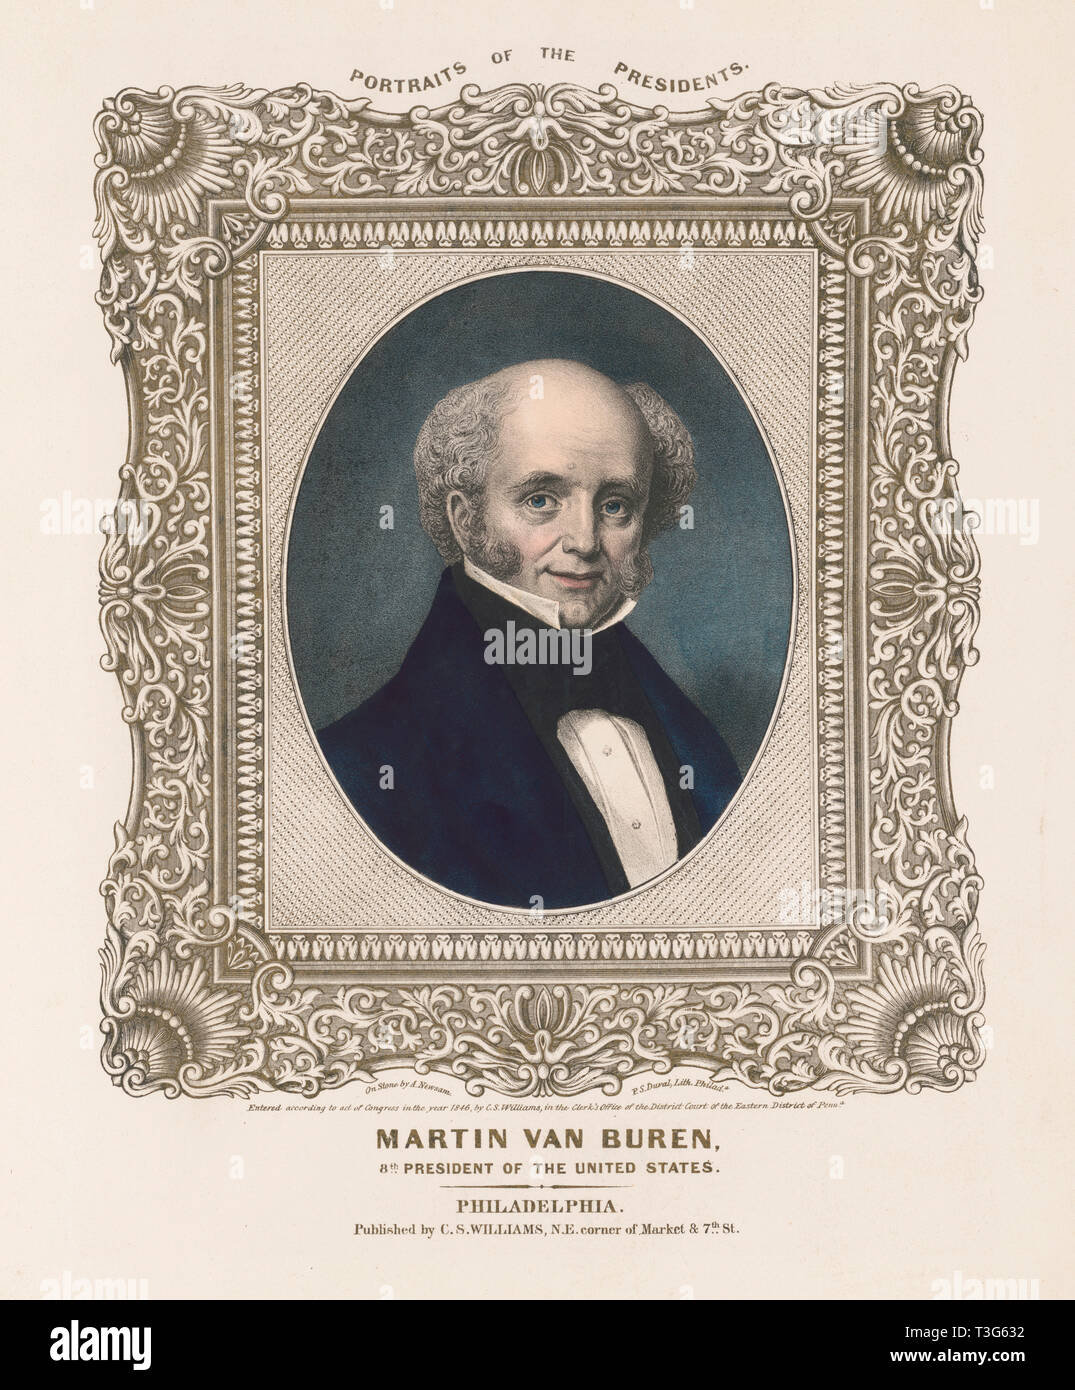 Martin Van Buren, Eighth President of the United States, from Life on Stone by A. Newsam, Lithograph by A. Duval, Published by C.S. Williams, Philadelphia, 1846 Stock Photo